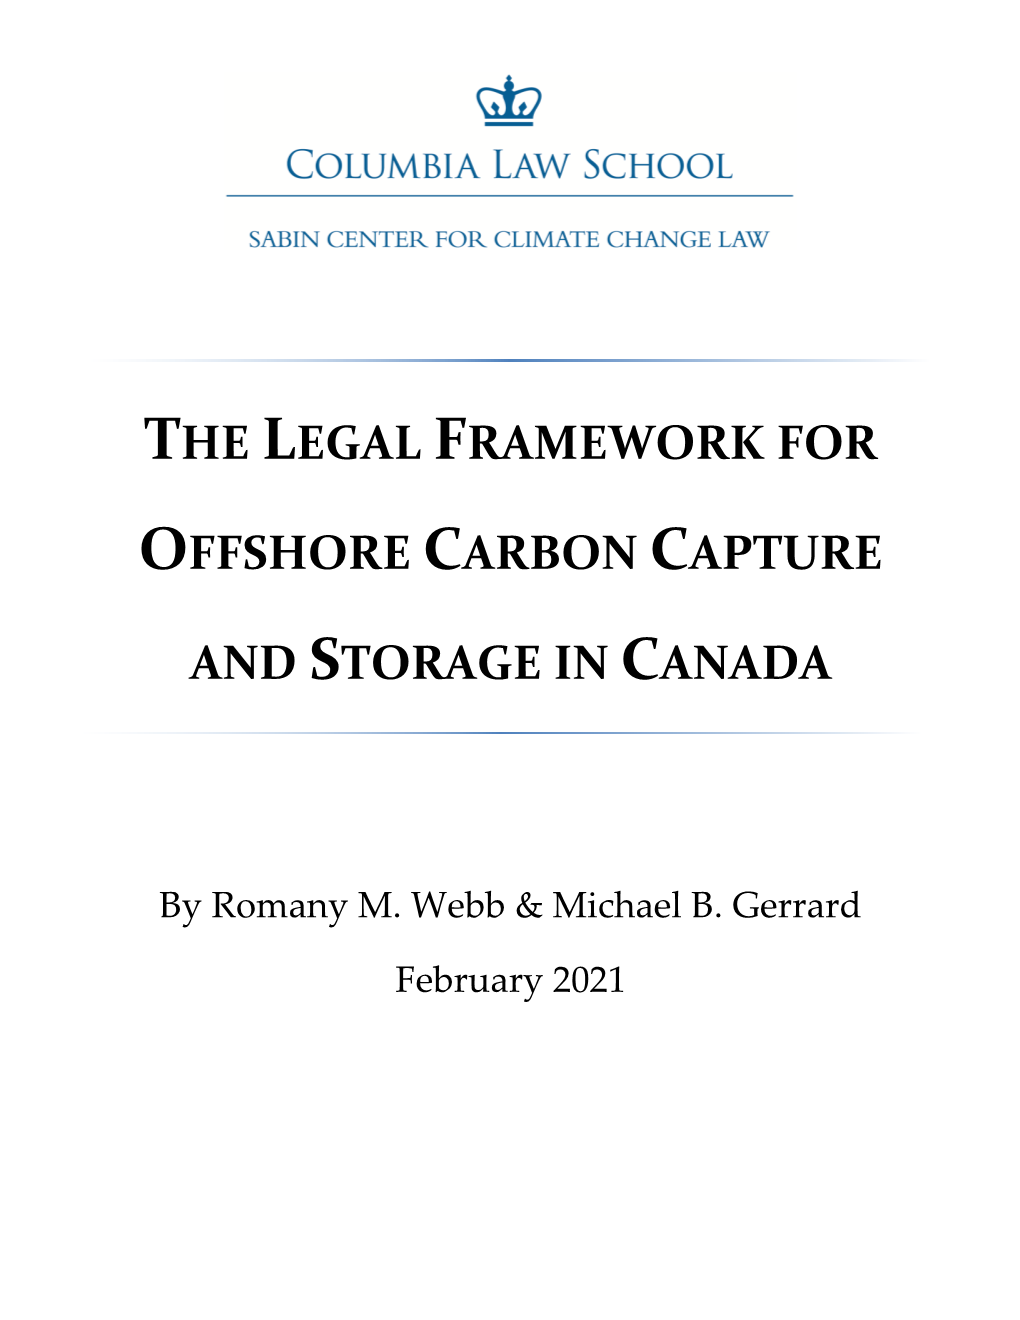 The Legal Framework for Offshore Carbon Capture and Storage in Canada